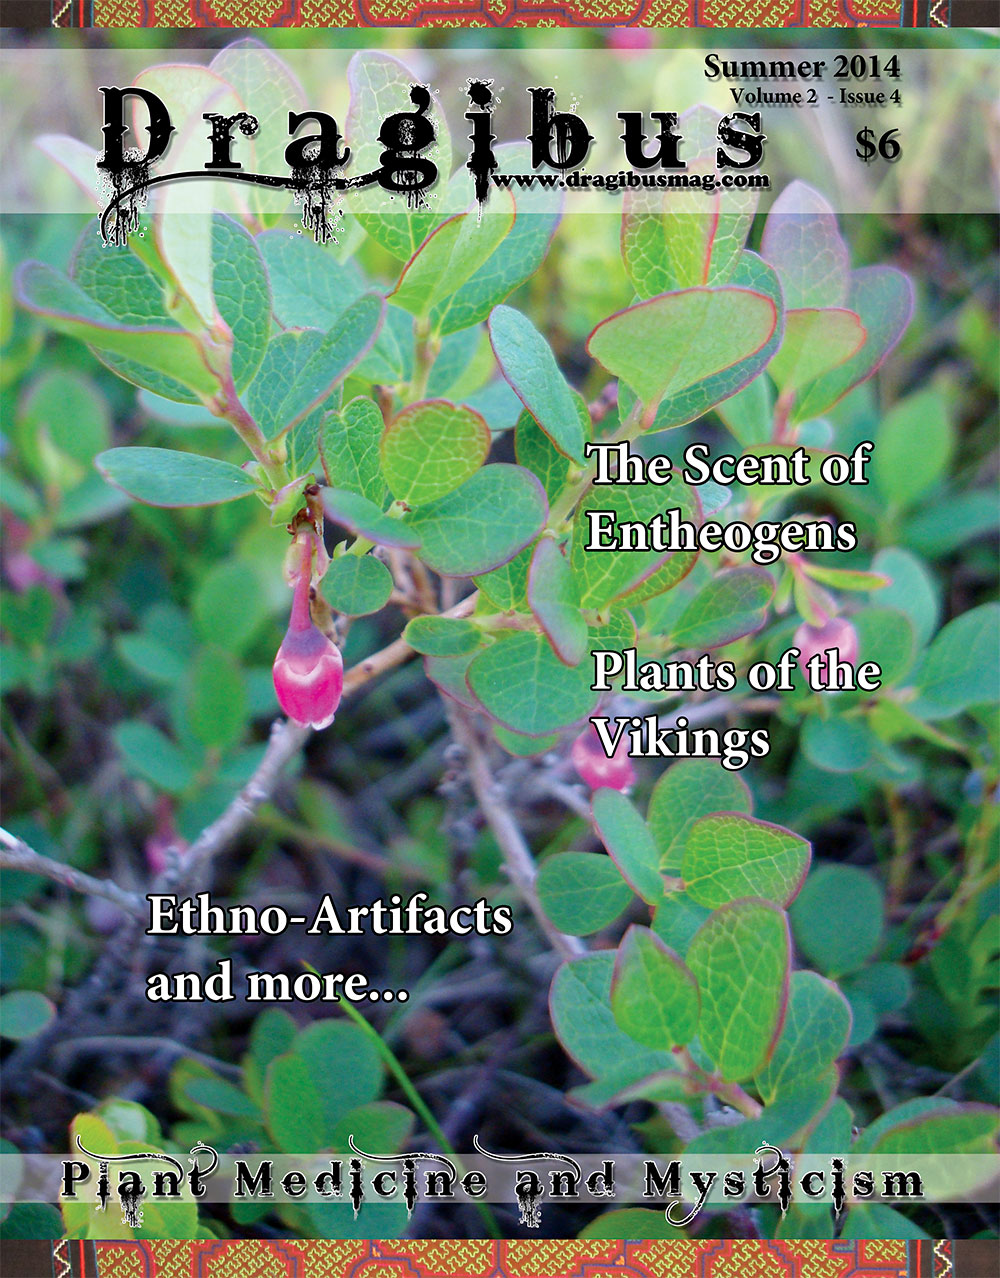 Dragibus Magazine - Plants of the Vikings, the Scent of Entheogens, a photo gallery of some Ethno-Artifacts, and more.